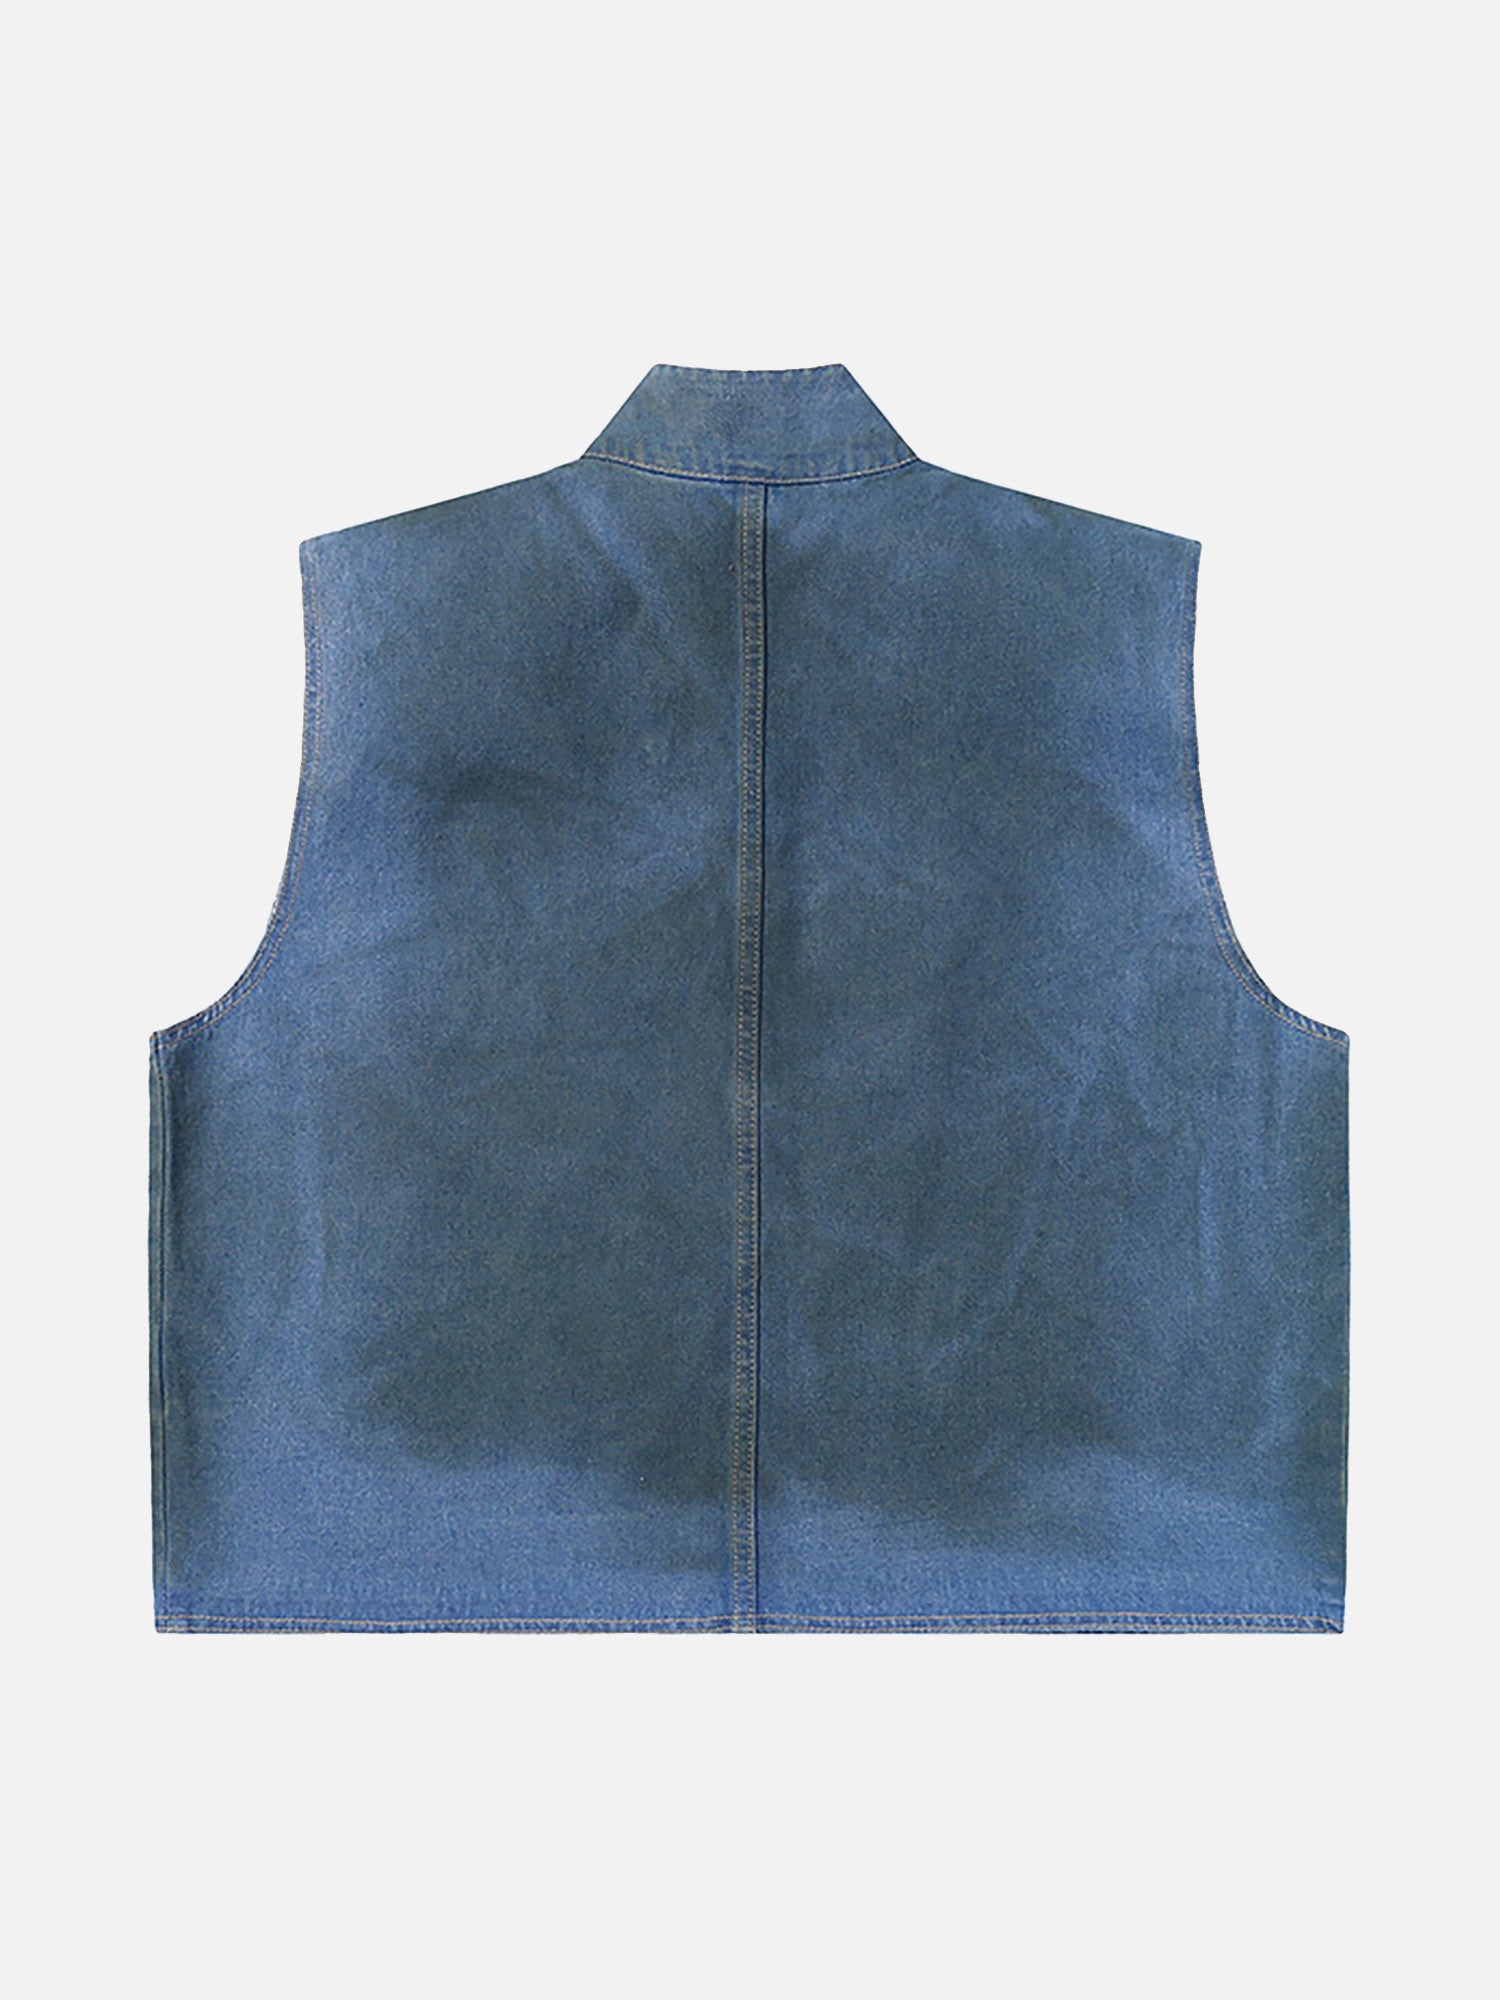 Thesupermade American Street Fashion Heavy Industry Washed Denim Vest Jacket